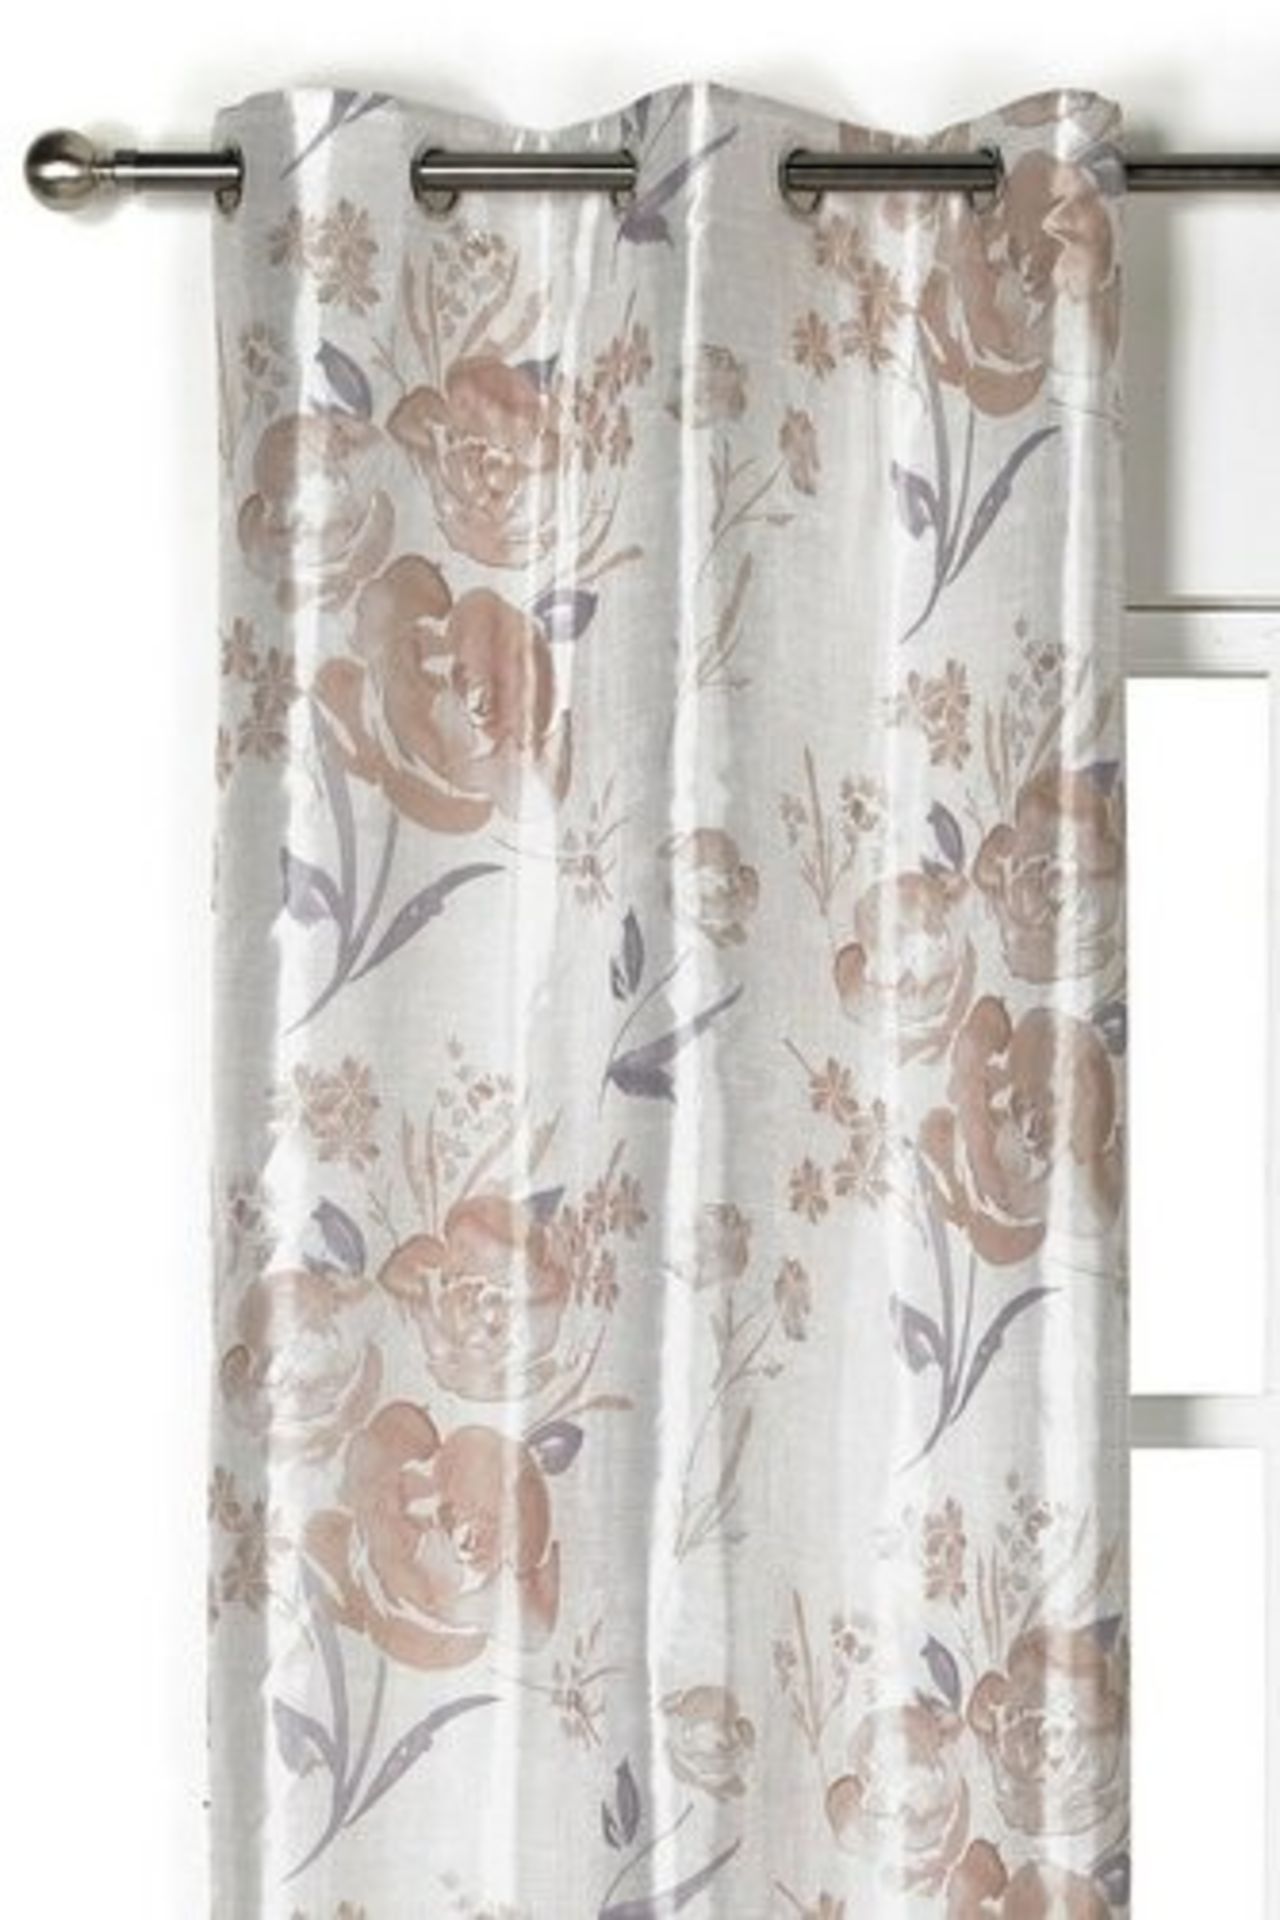 1 AS NEW BAGGED CHATSWORTH FULLY LINED THERMAL EYELET CURTAINS IN GREY / APPROX 46" X 72" (VIEWING